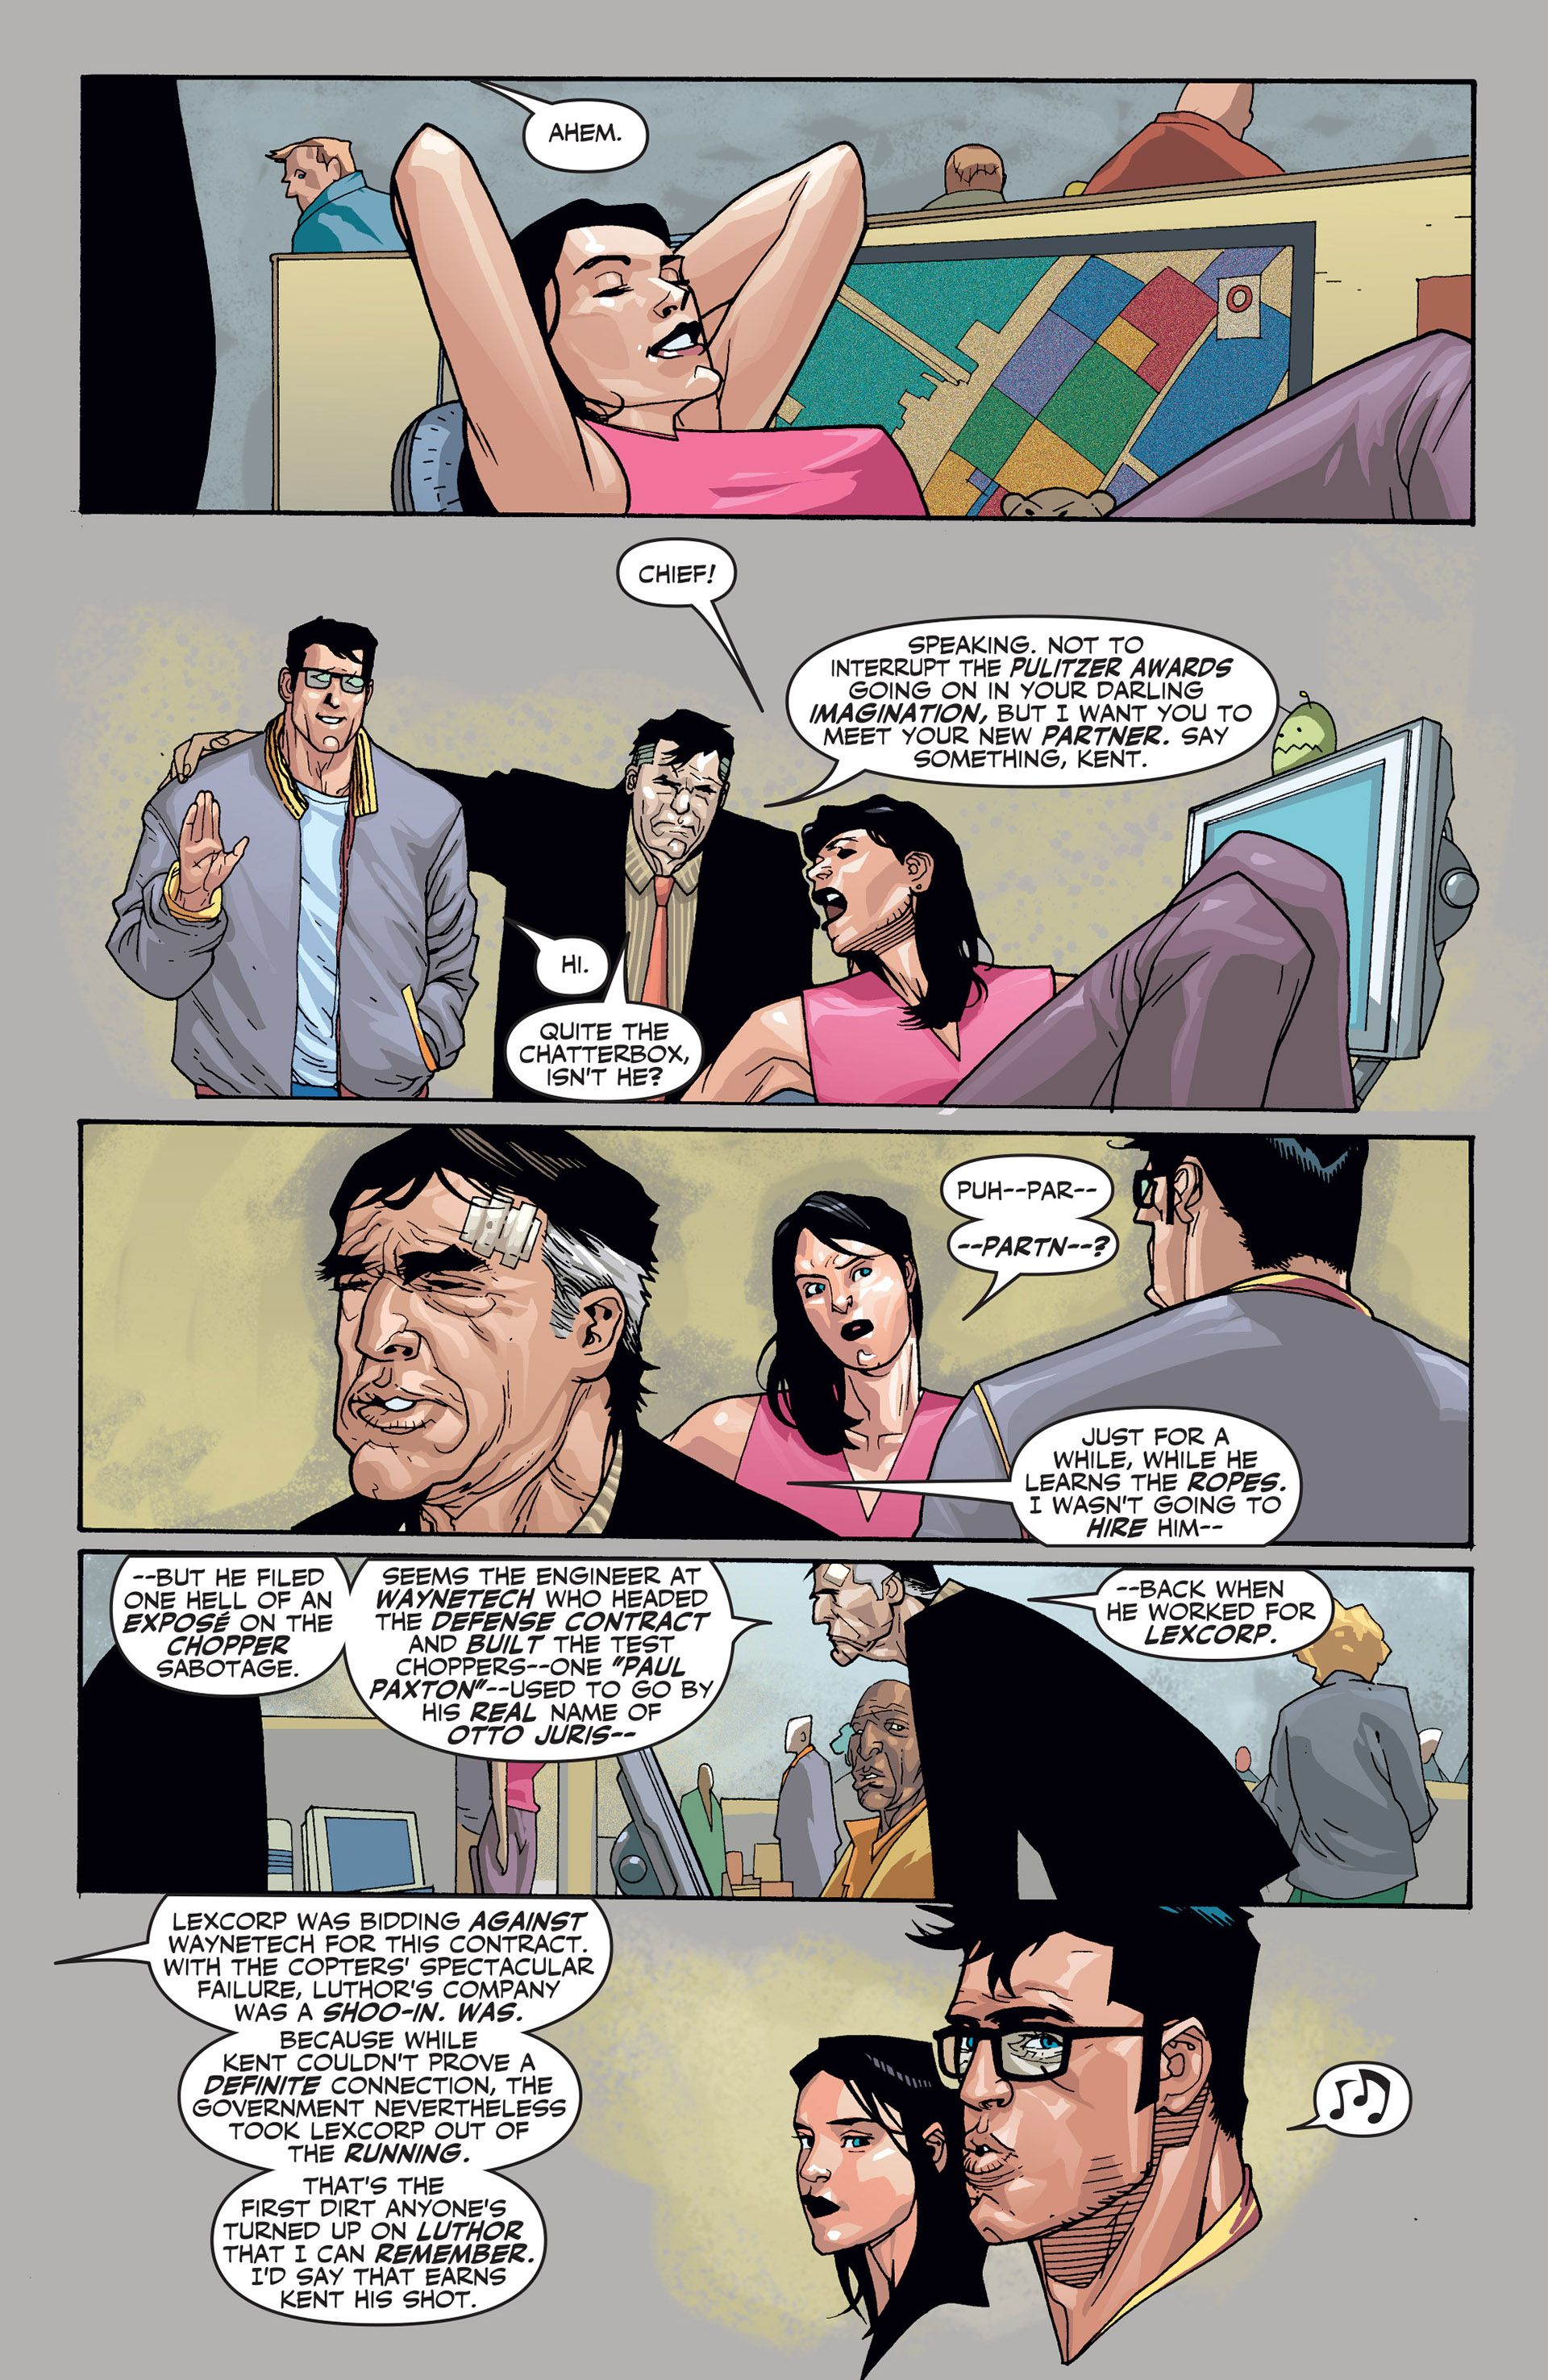 Clark gets hired after getting a scoop about Lex Luthor